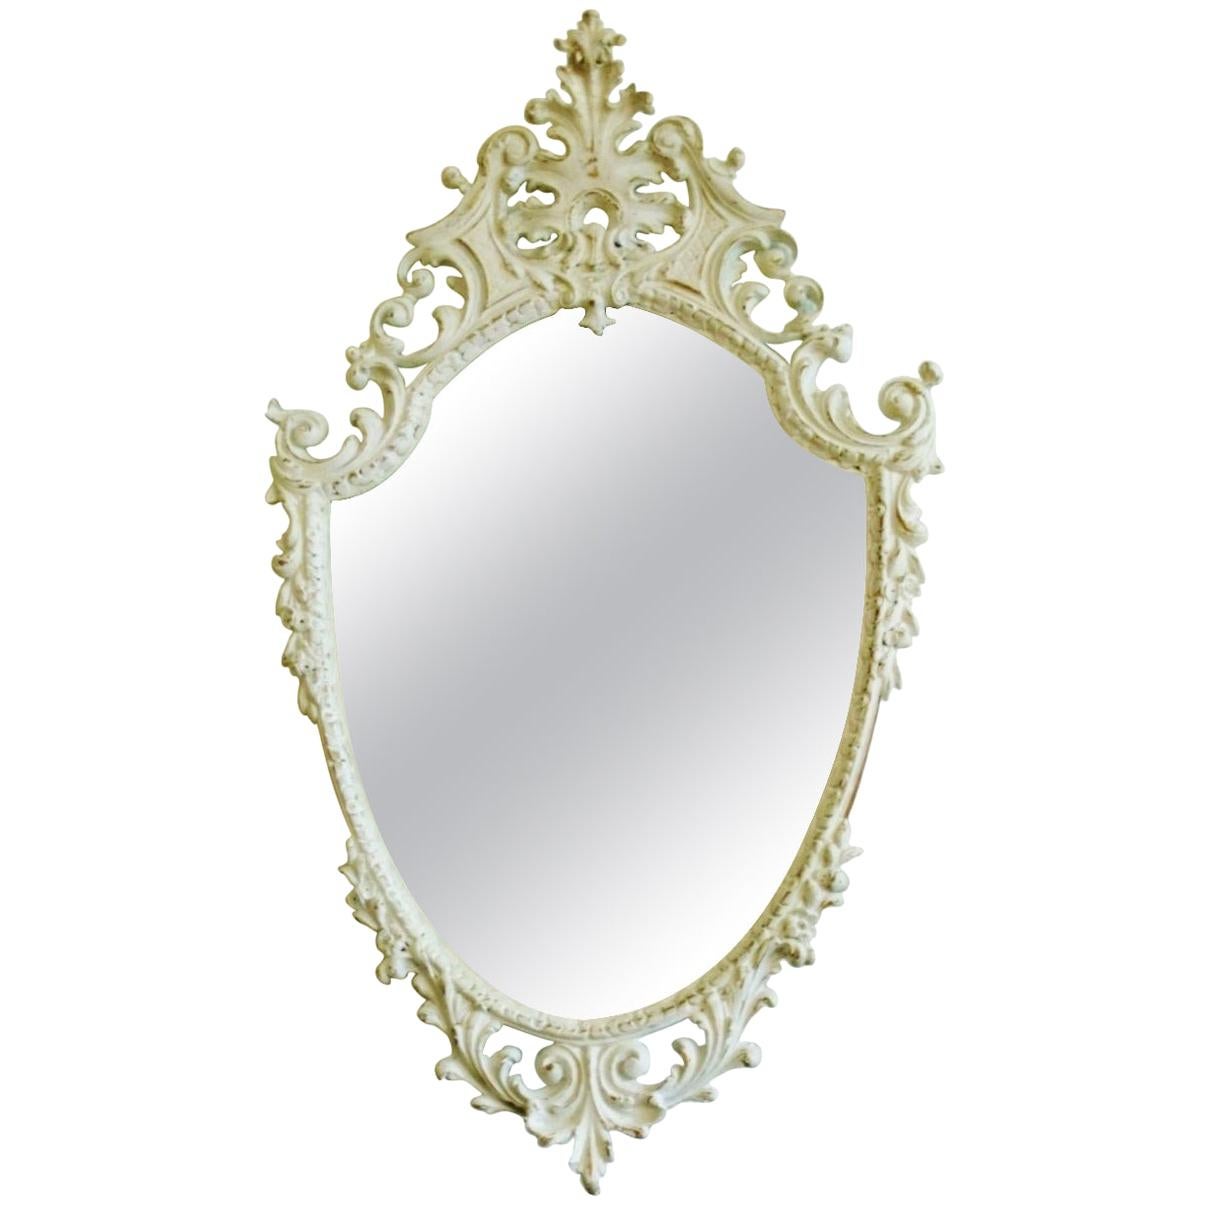 Antique Italian Rococo Style Hand-Carved Wood Gilded and White Arched Top Mirror For Sale